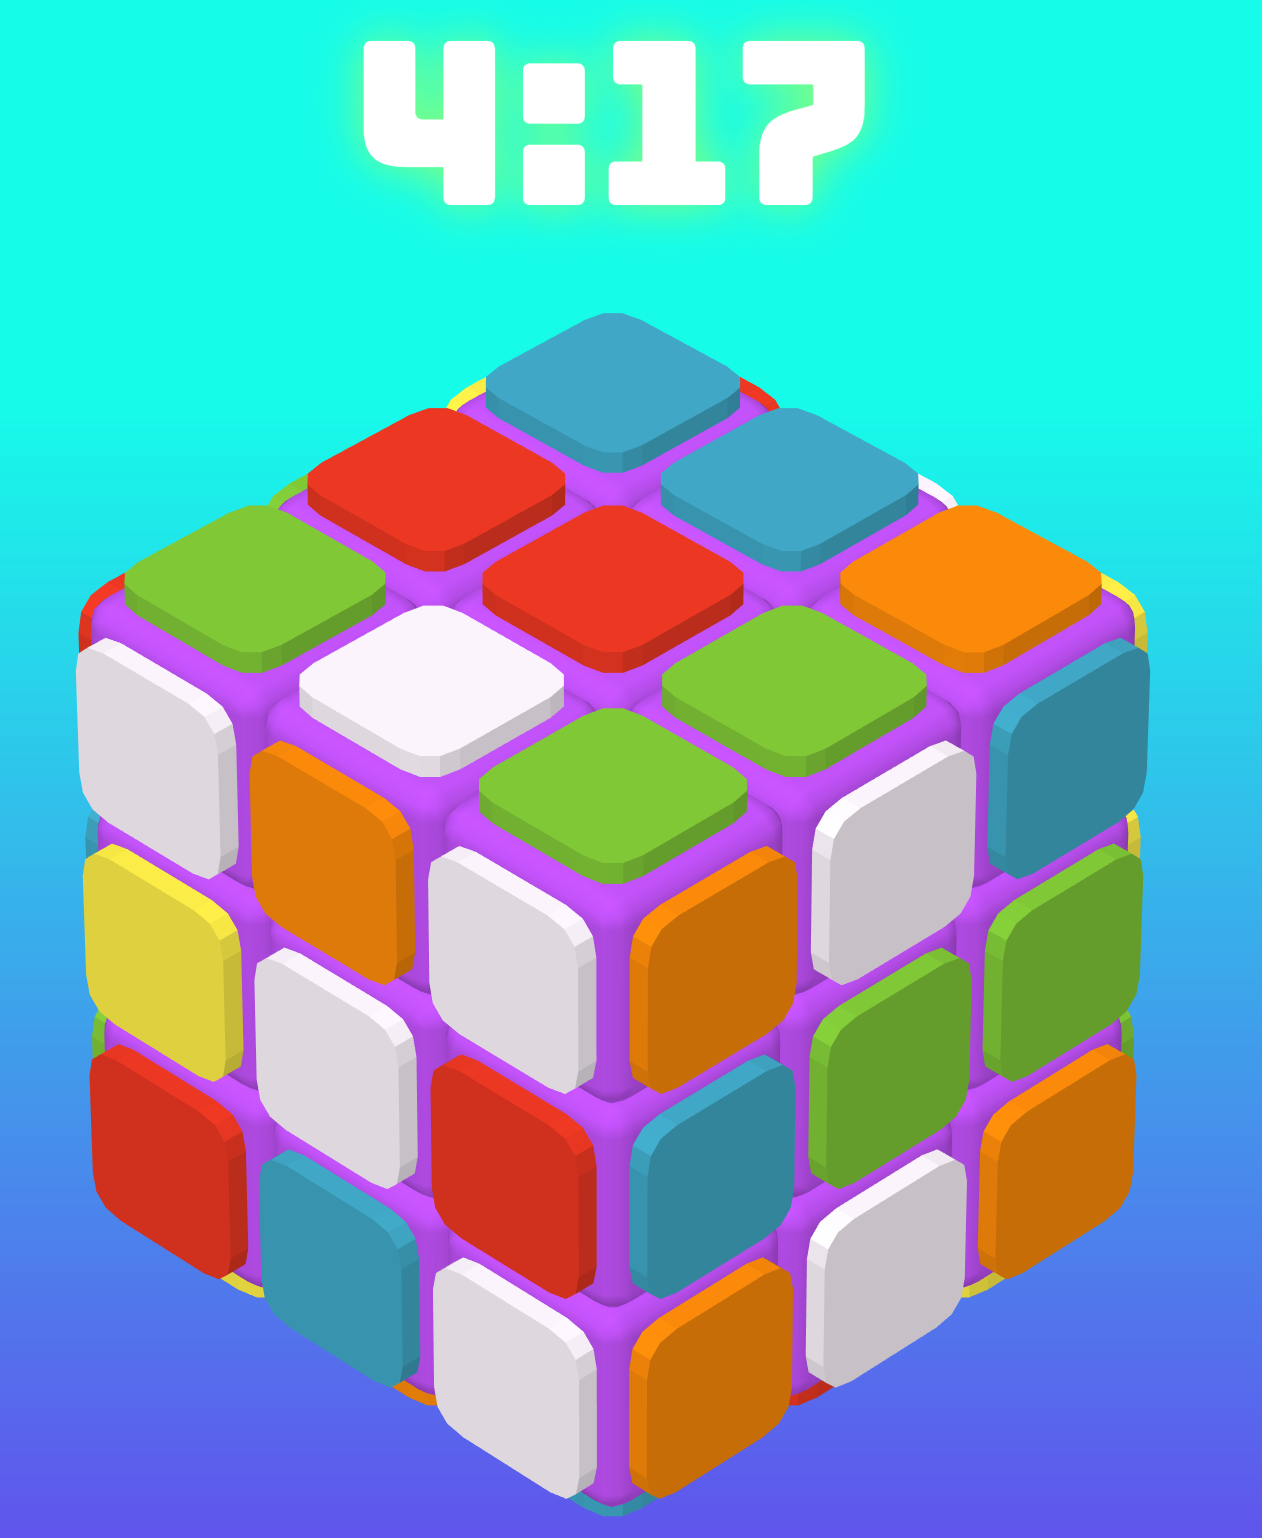 play-rubiks-cube-game-online-for-free-html5-rubkis-cube-game